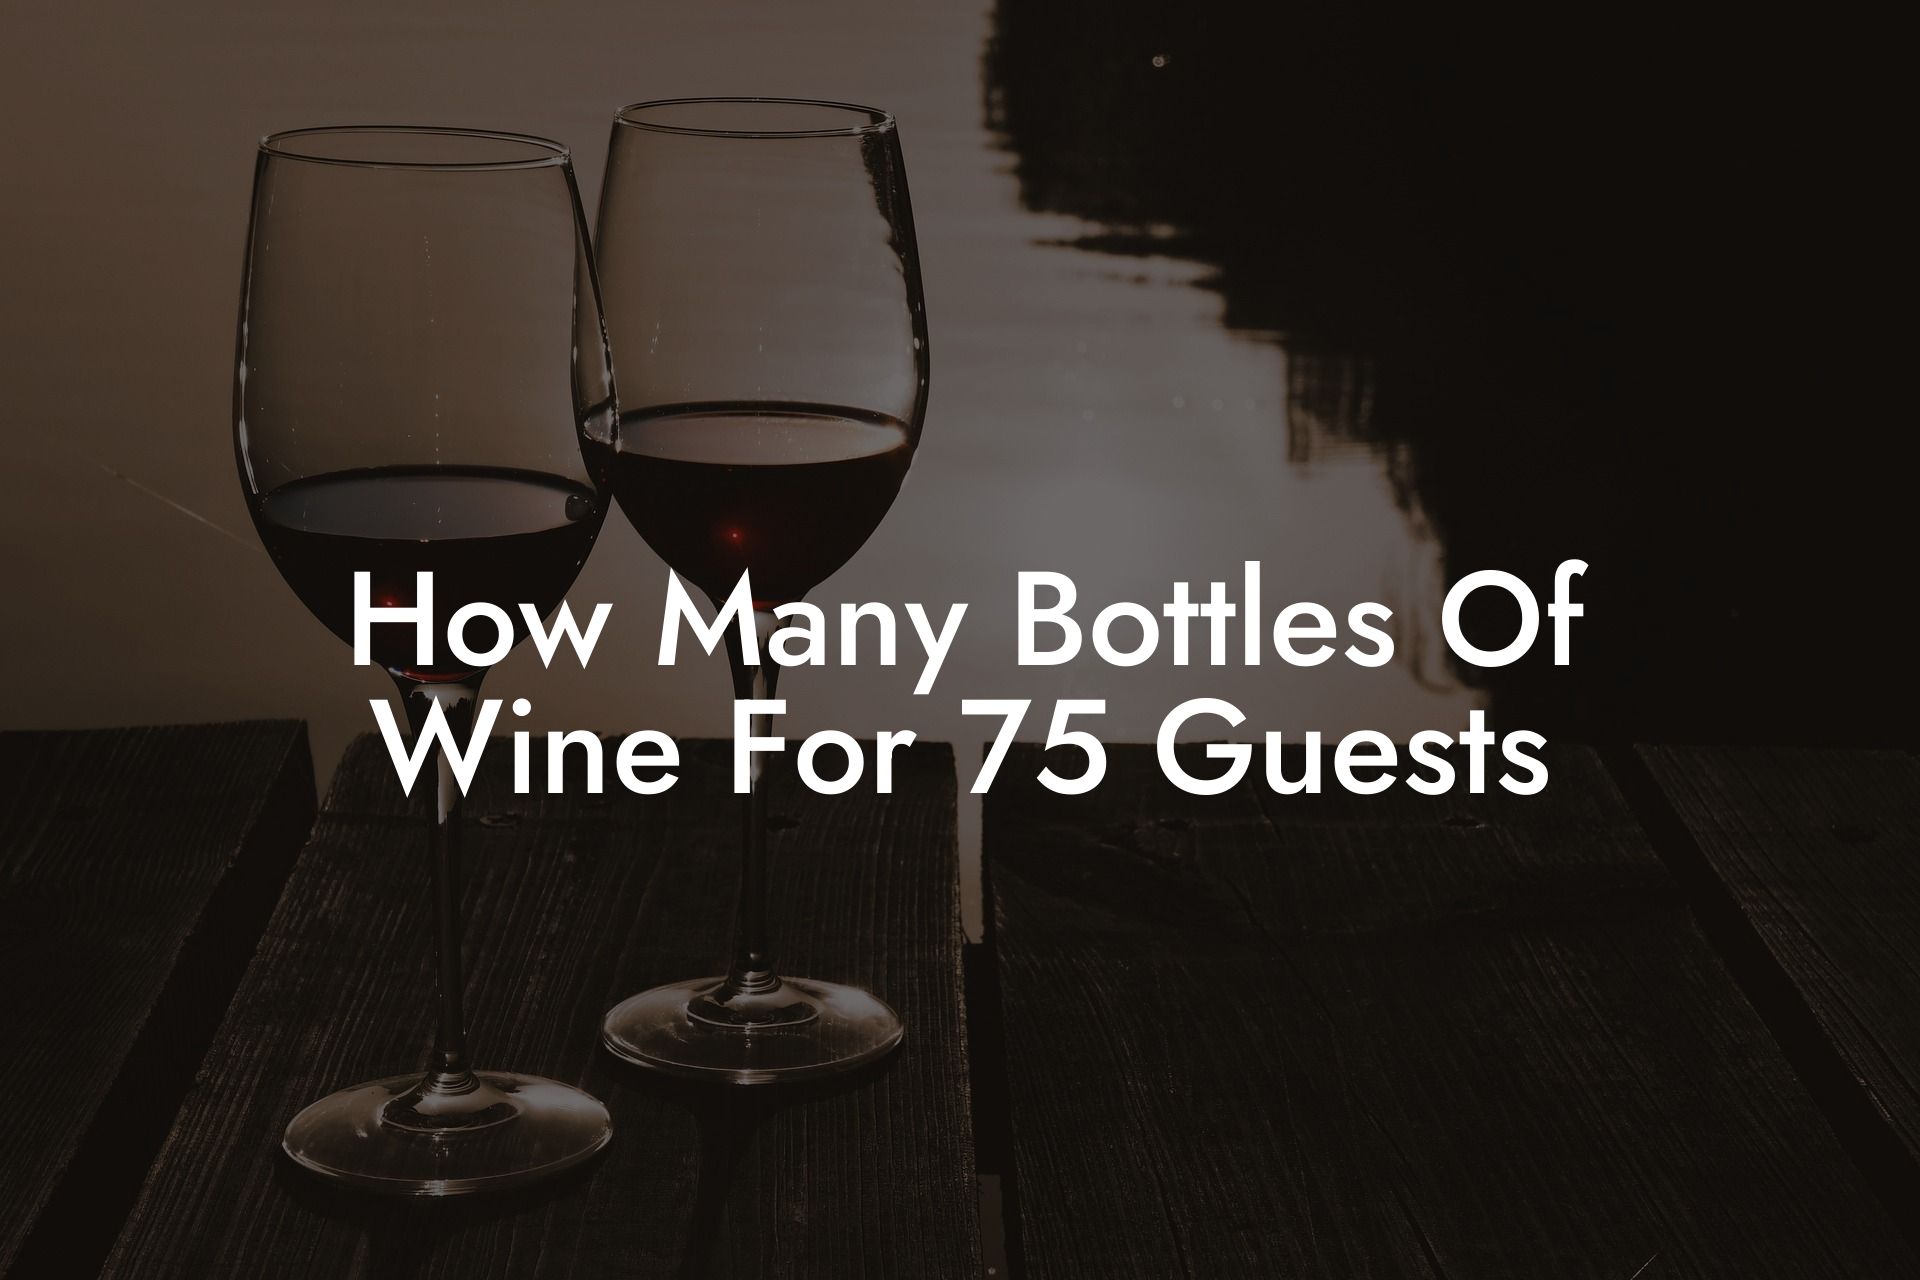 How Many Bottles Of Wine For 75 Guests